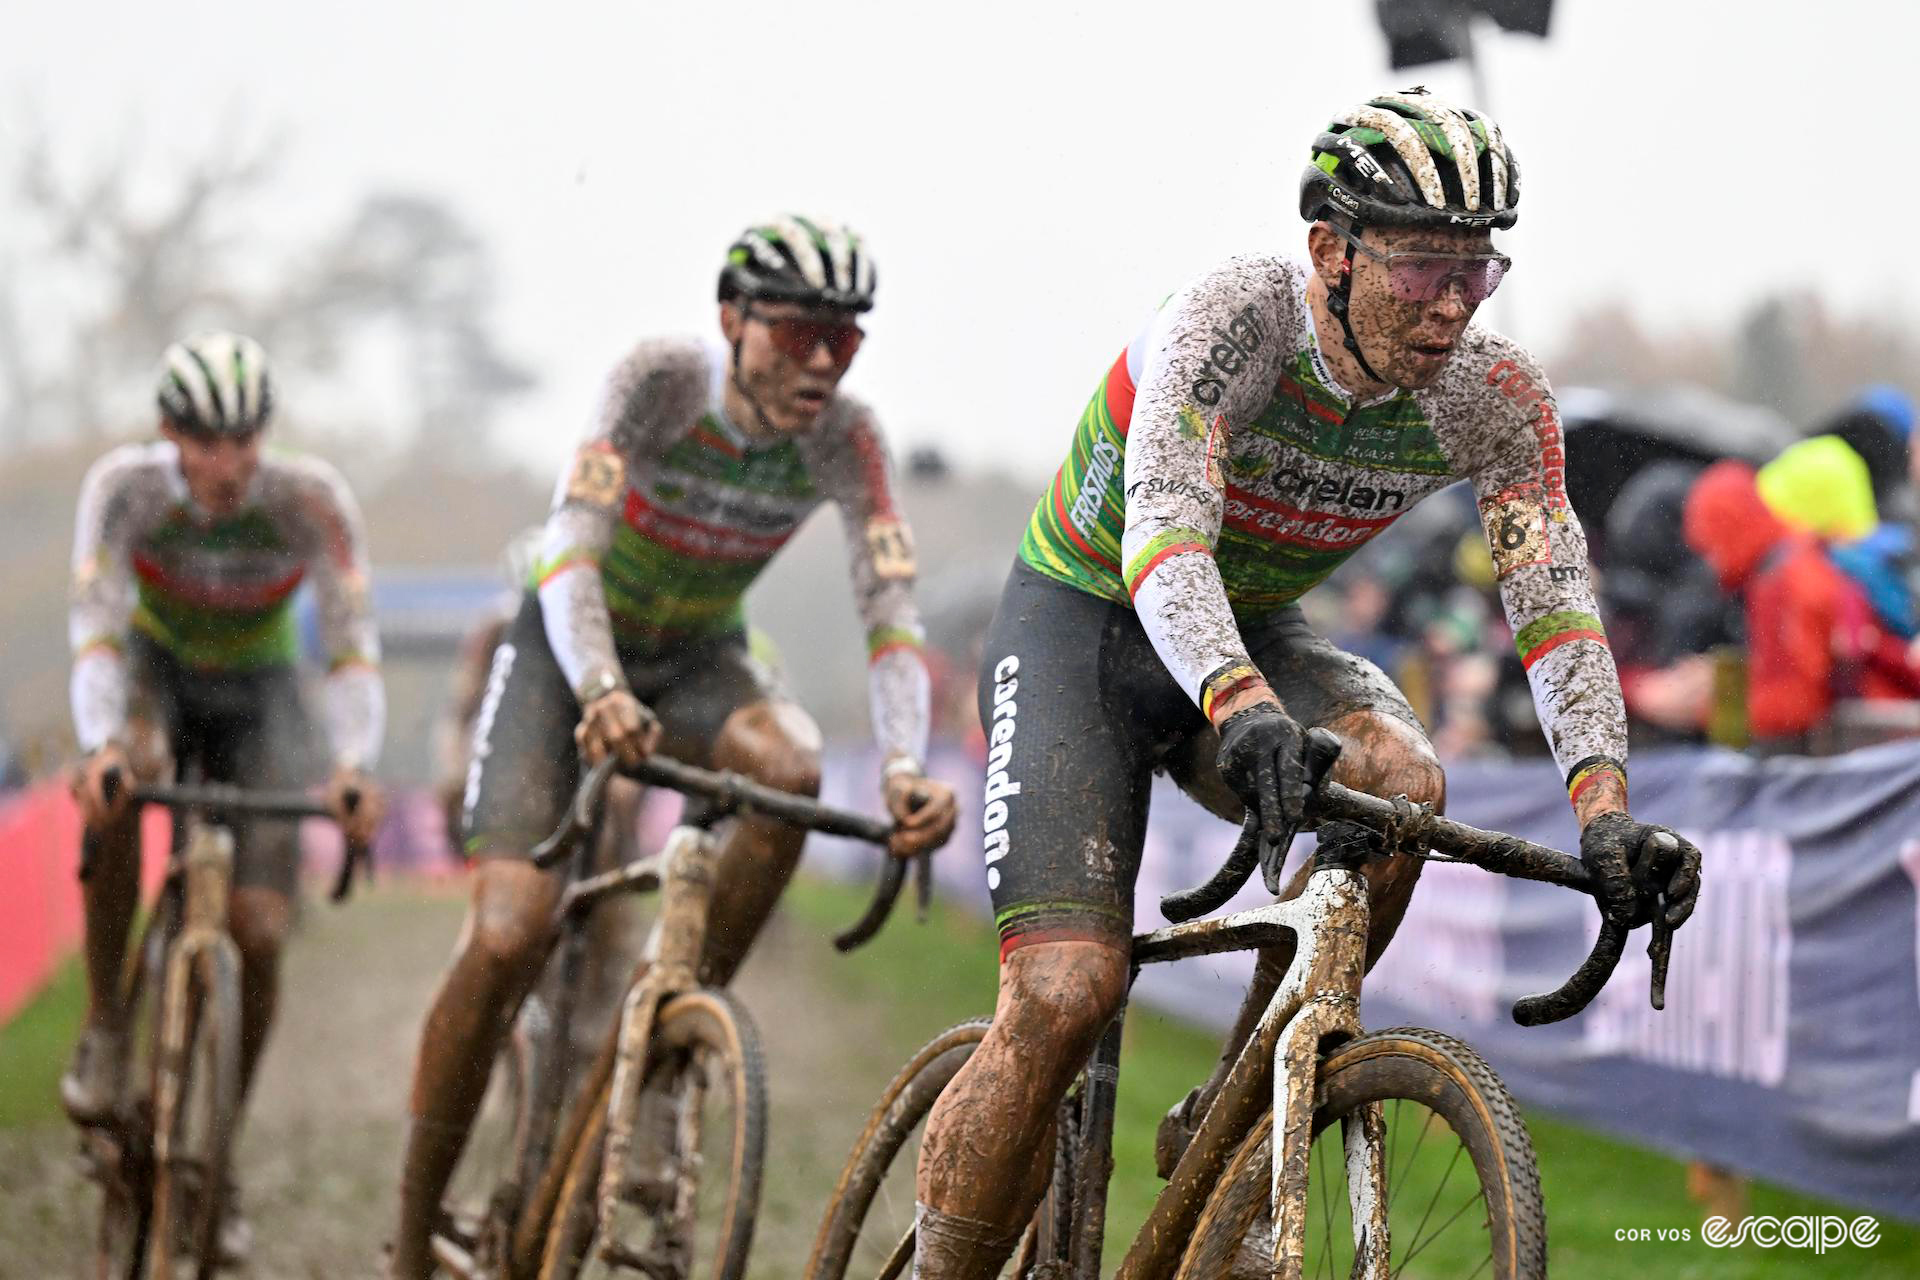 Laurens Sweeck is the first in a line of three Crelan-Corendon riders, all of them splashed with mud, early in CX World Cup Dublin.